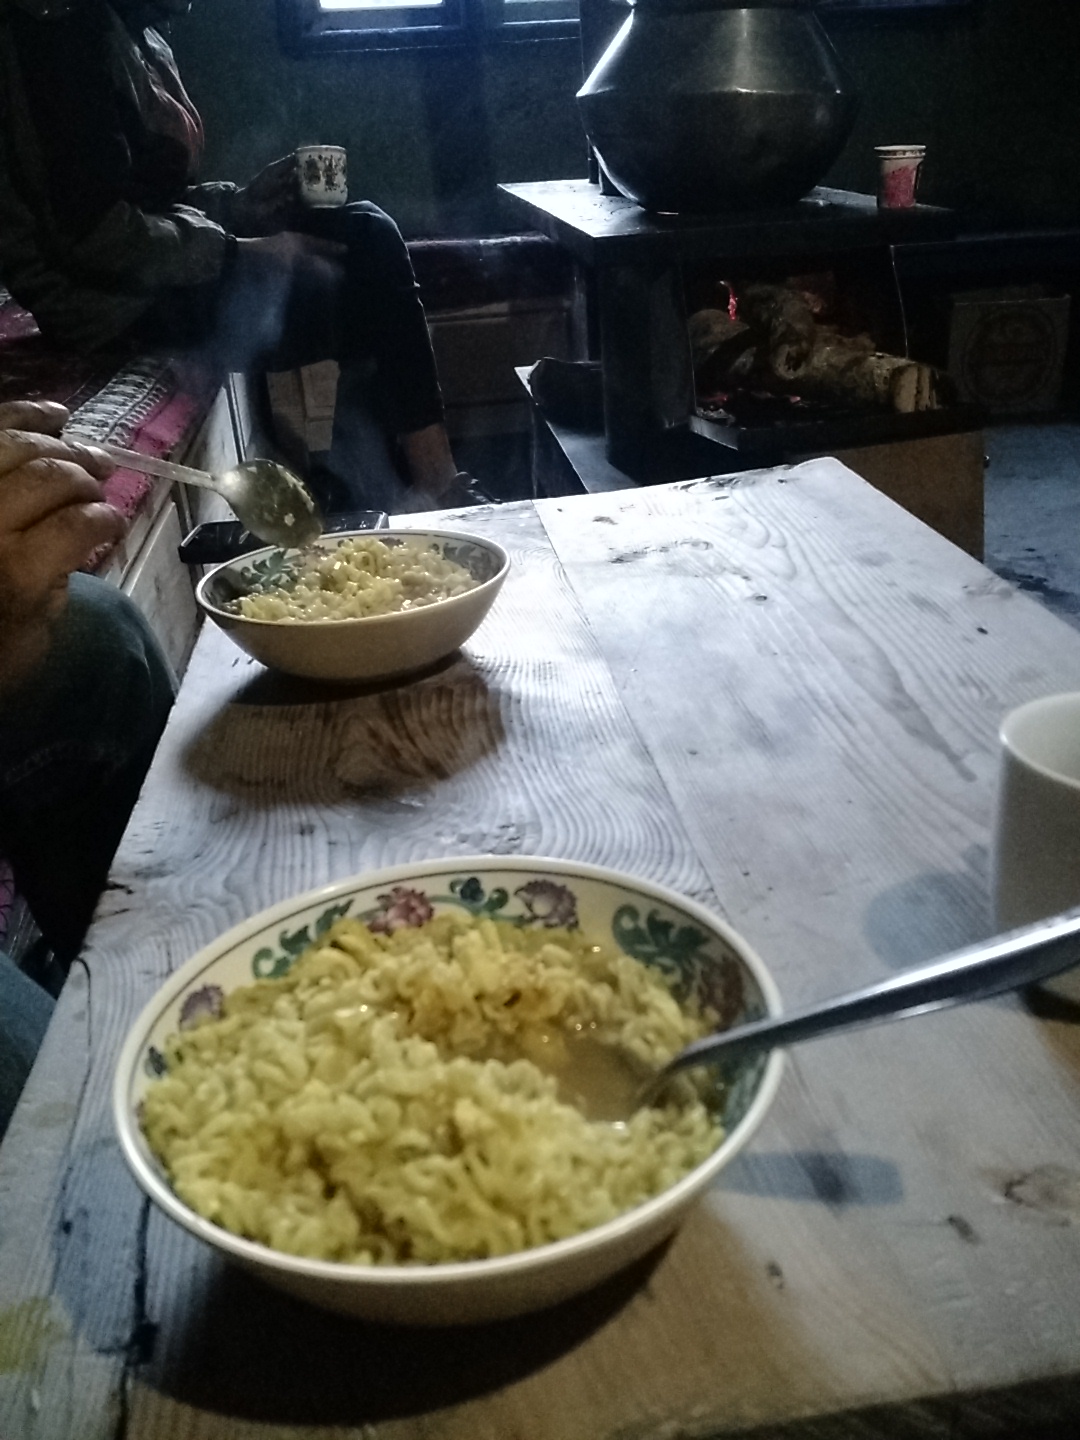 Making a Sikkim itinerary is not easy as food joints are limited in numbera